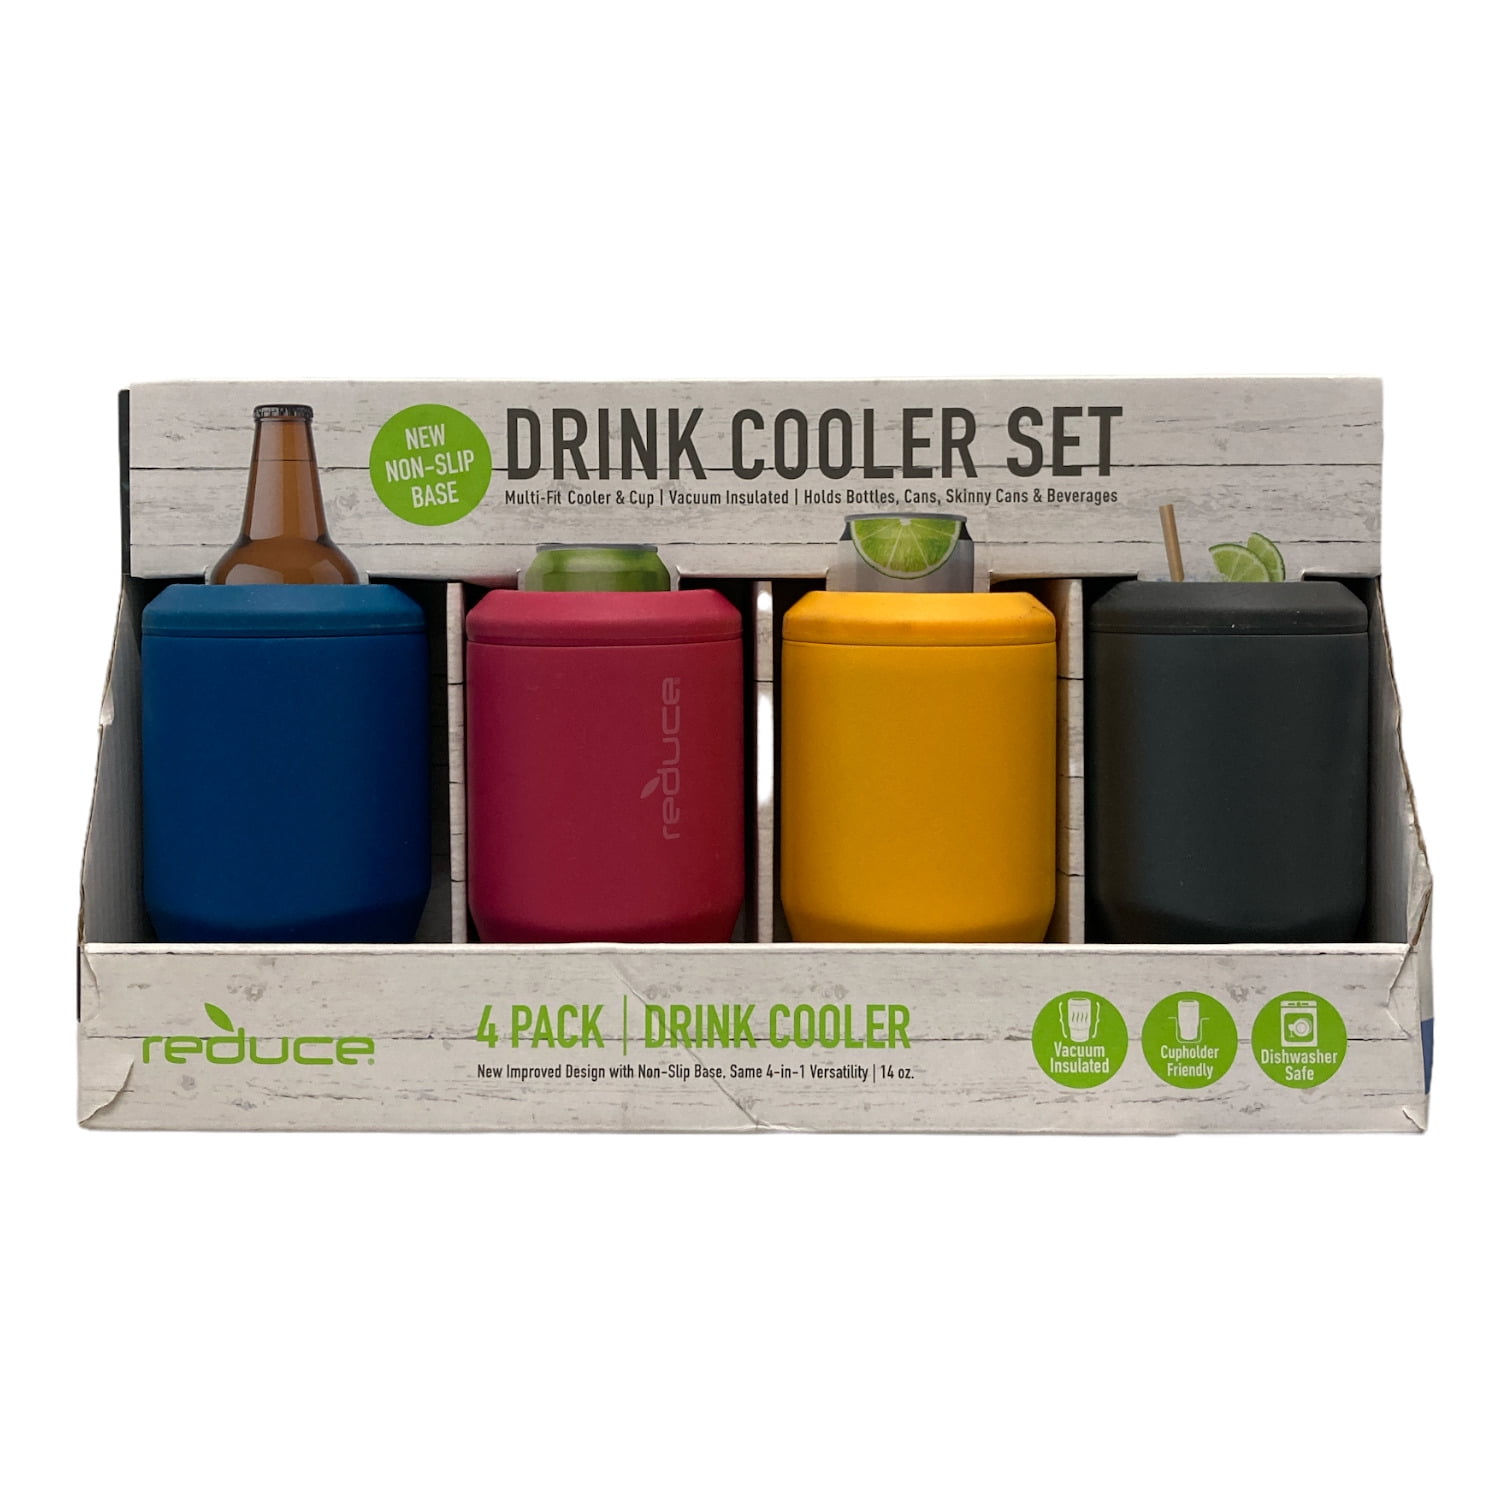 REDUCE 14 oz. Vacuum Insulated Stainless Steel Drink Cooler, 4 Pack  Built-in Bottle Opener whit Non-Slip Base 4-in-1 Versatility Colors